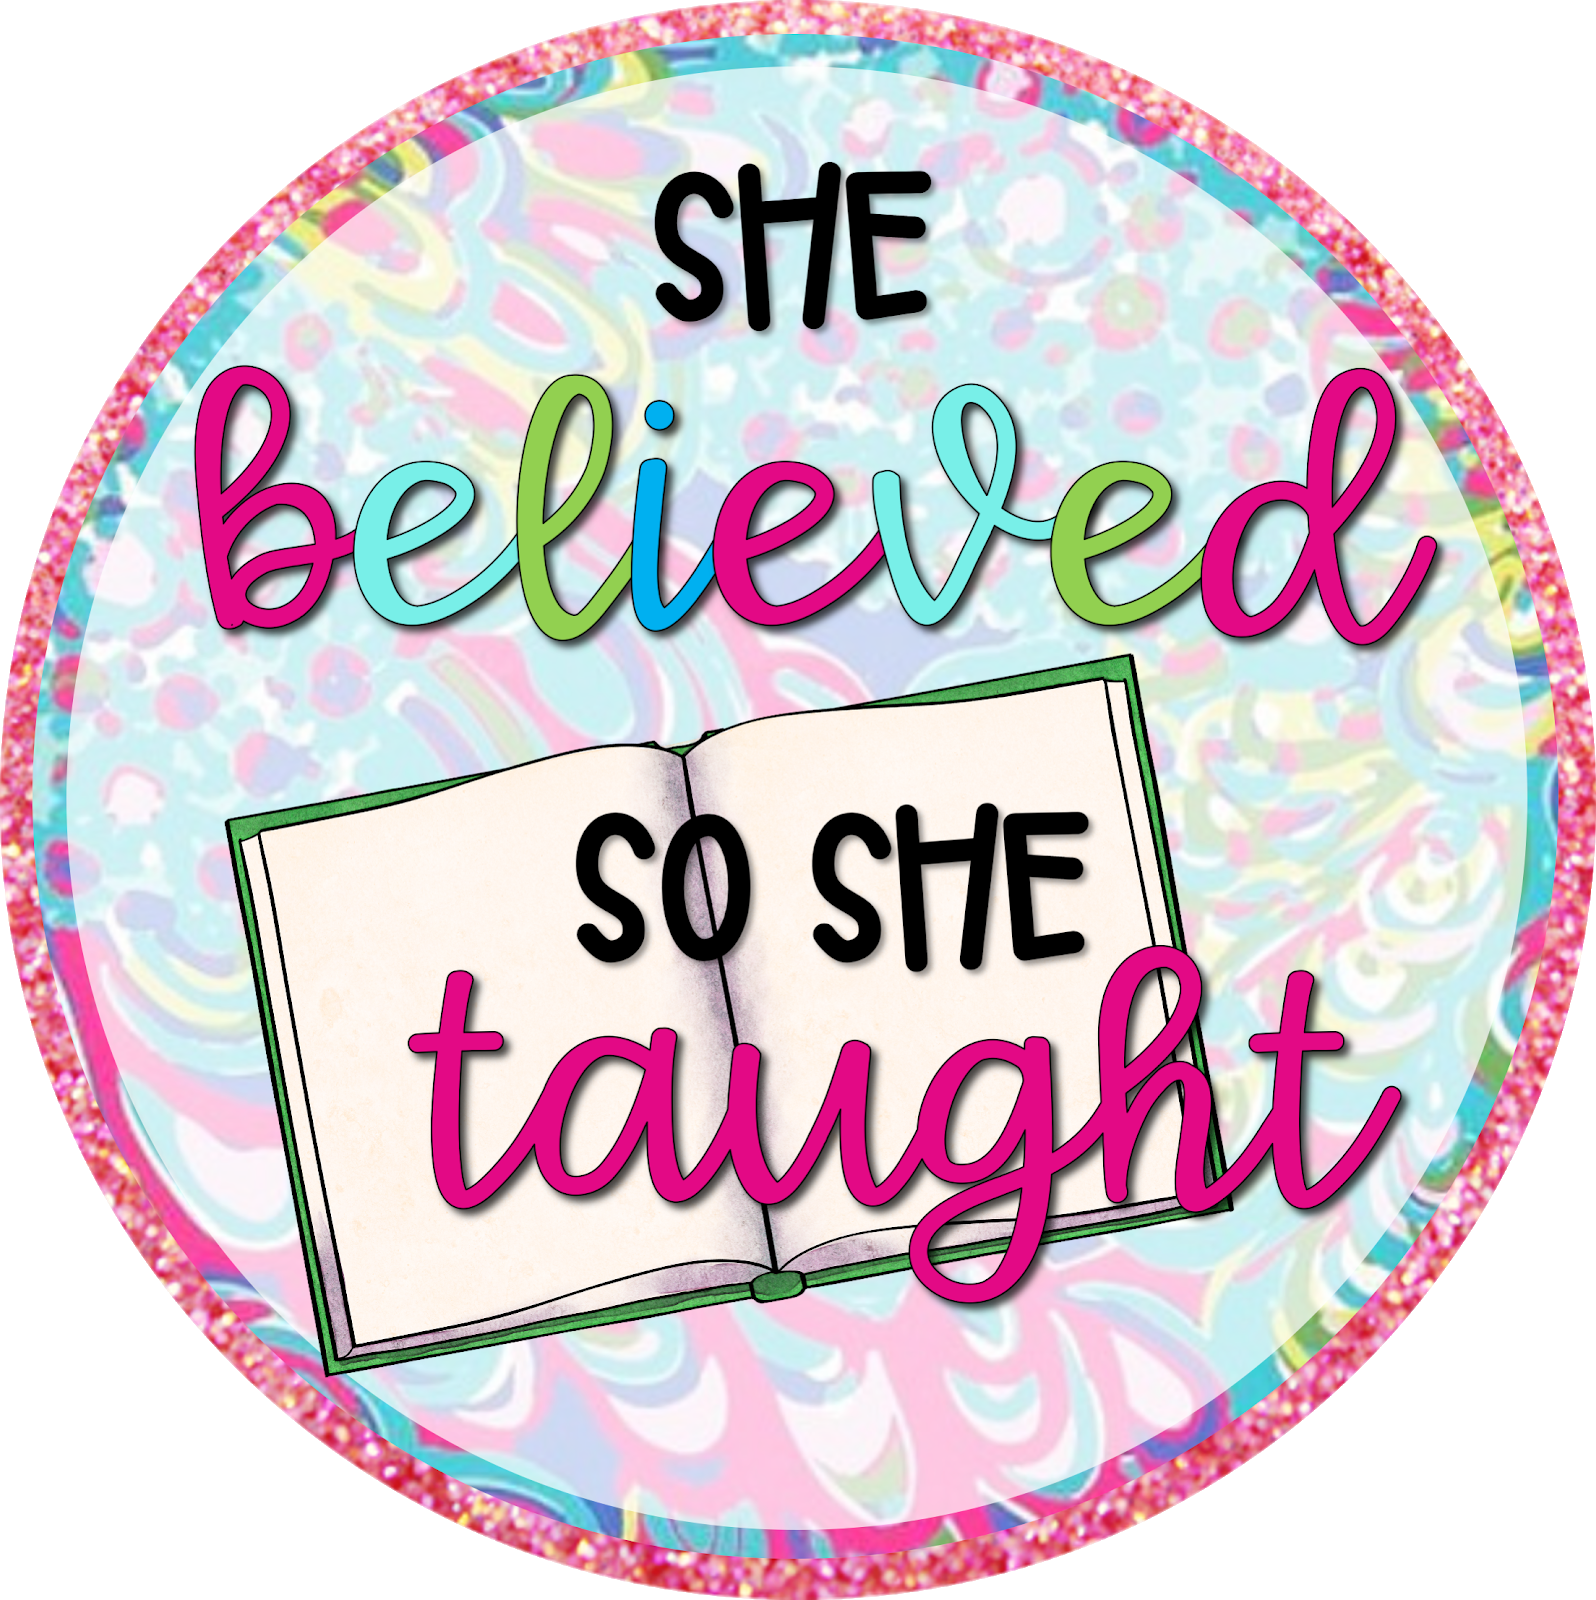 She Believed So She Taught